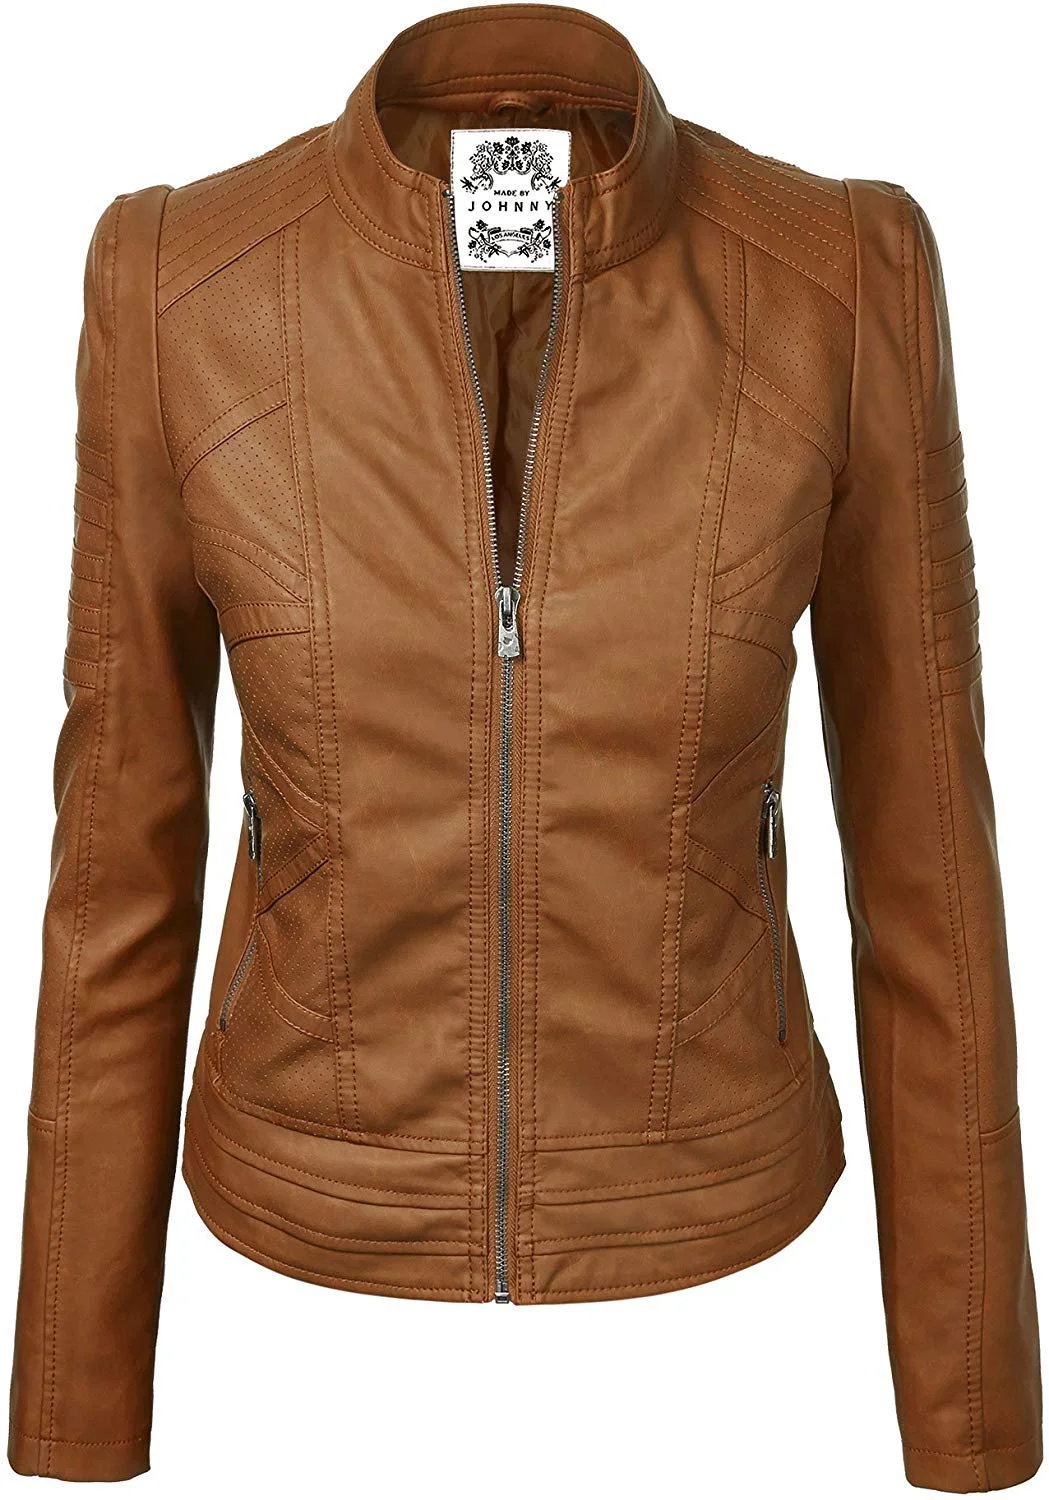 Made By Johnny Womens Faux Leather Zip Up Moto Biker Jacket with Stitching Detail